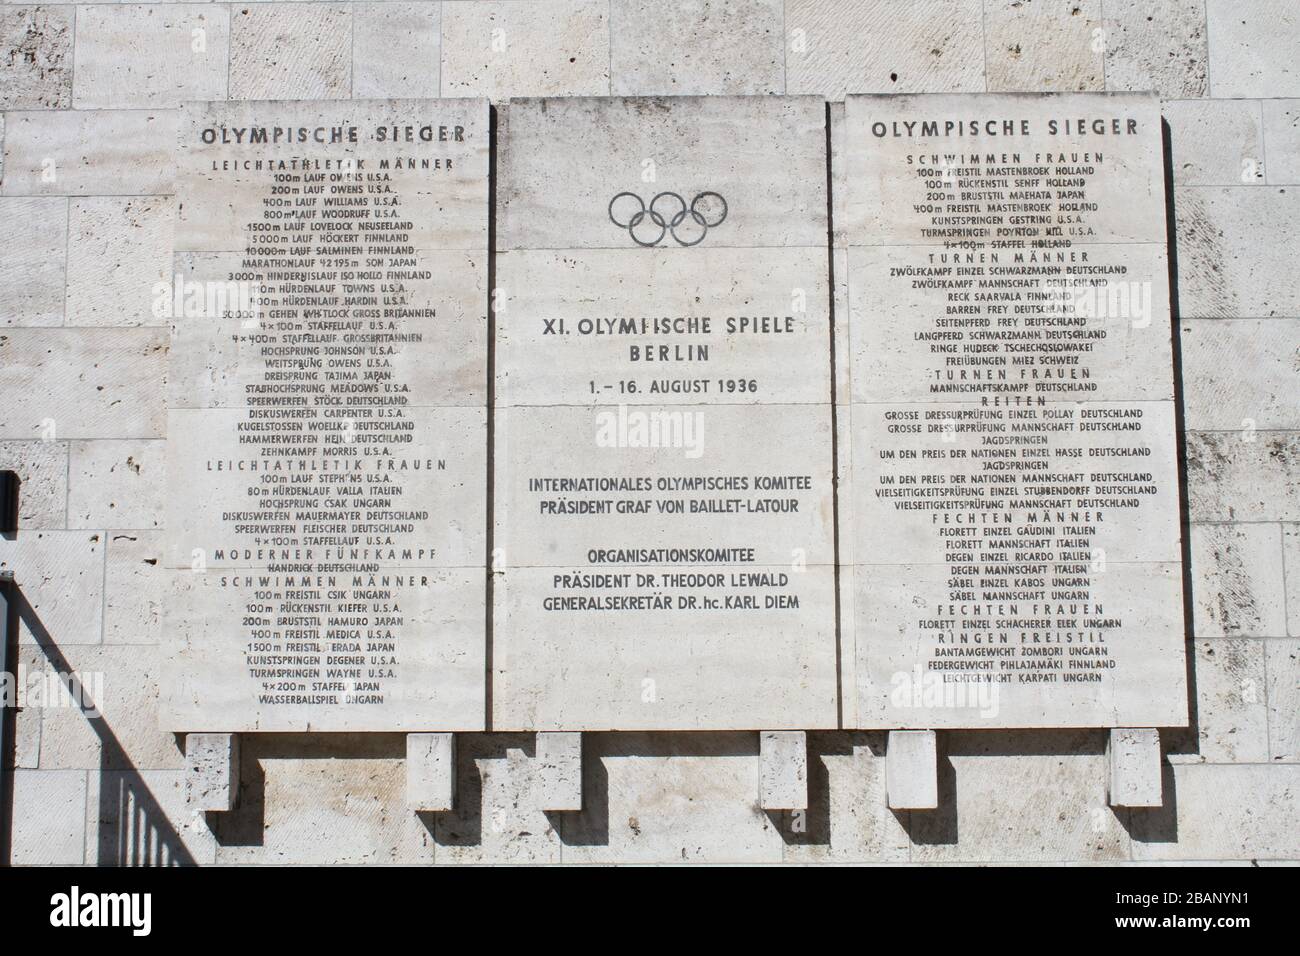 Inauguration plaque of the olympic stadium in berlin Stock Photo